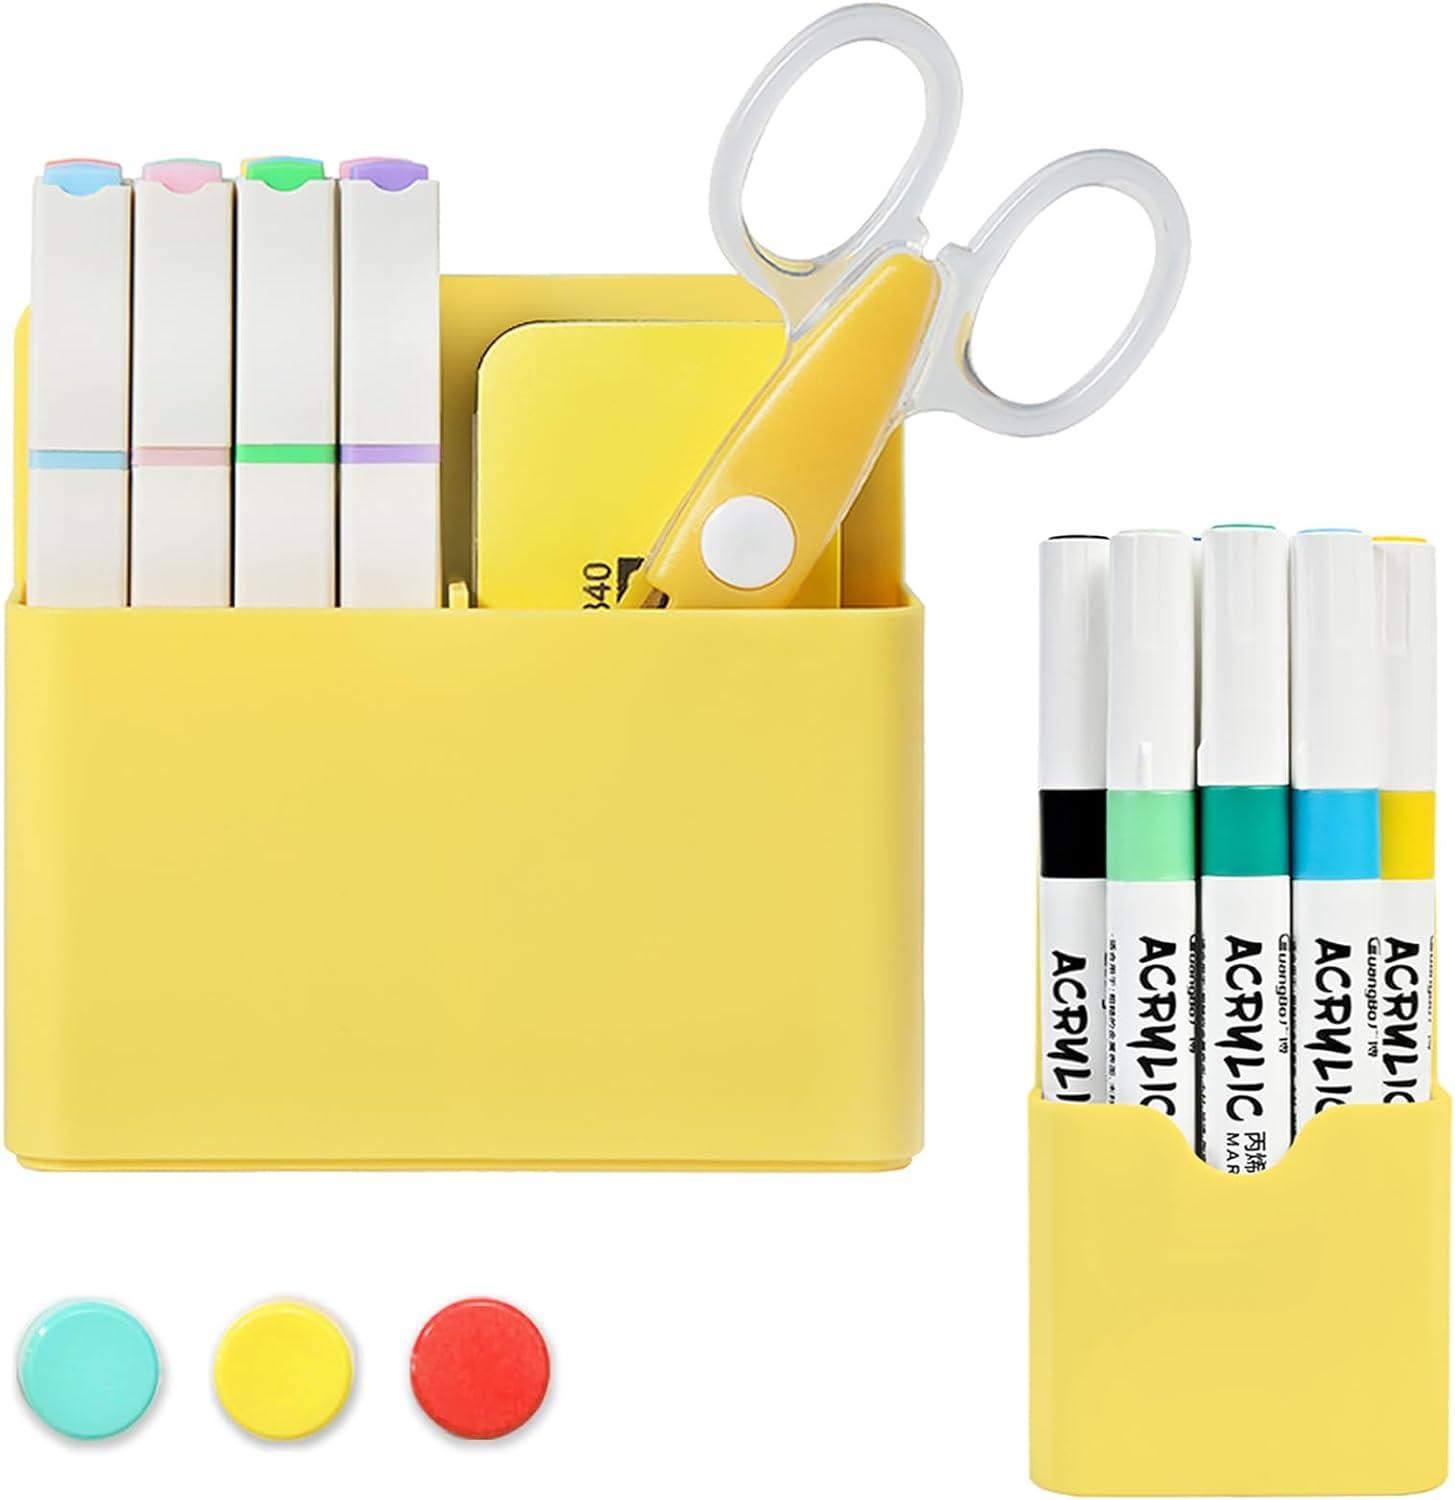 2 pack magnetic dry erase marker holder magnetic pen and eraser holder with compartments for whiteboard 